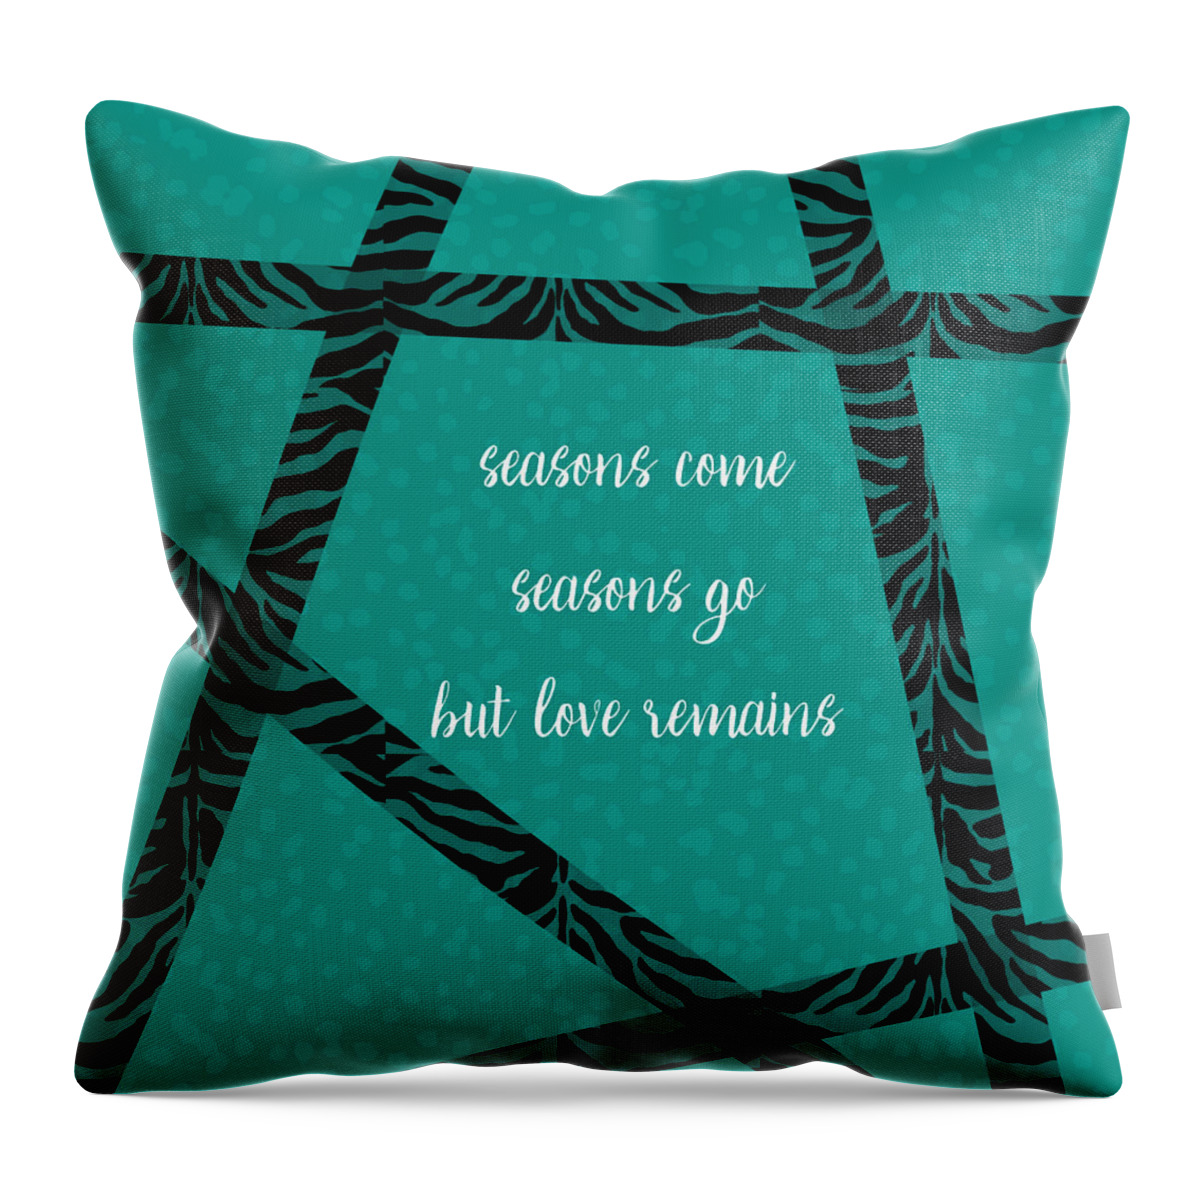 Inspirational Throw Pillow featuring the digital art Love Remains by Bonnie Bruno